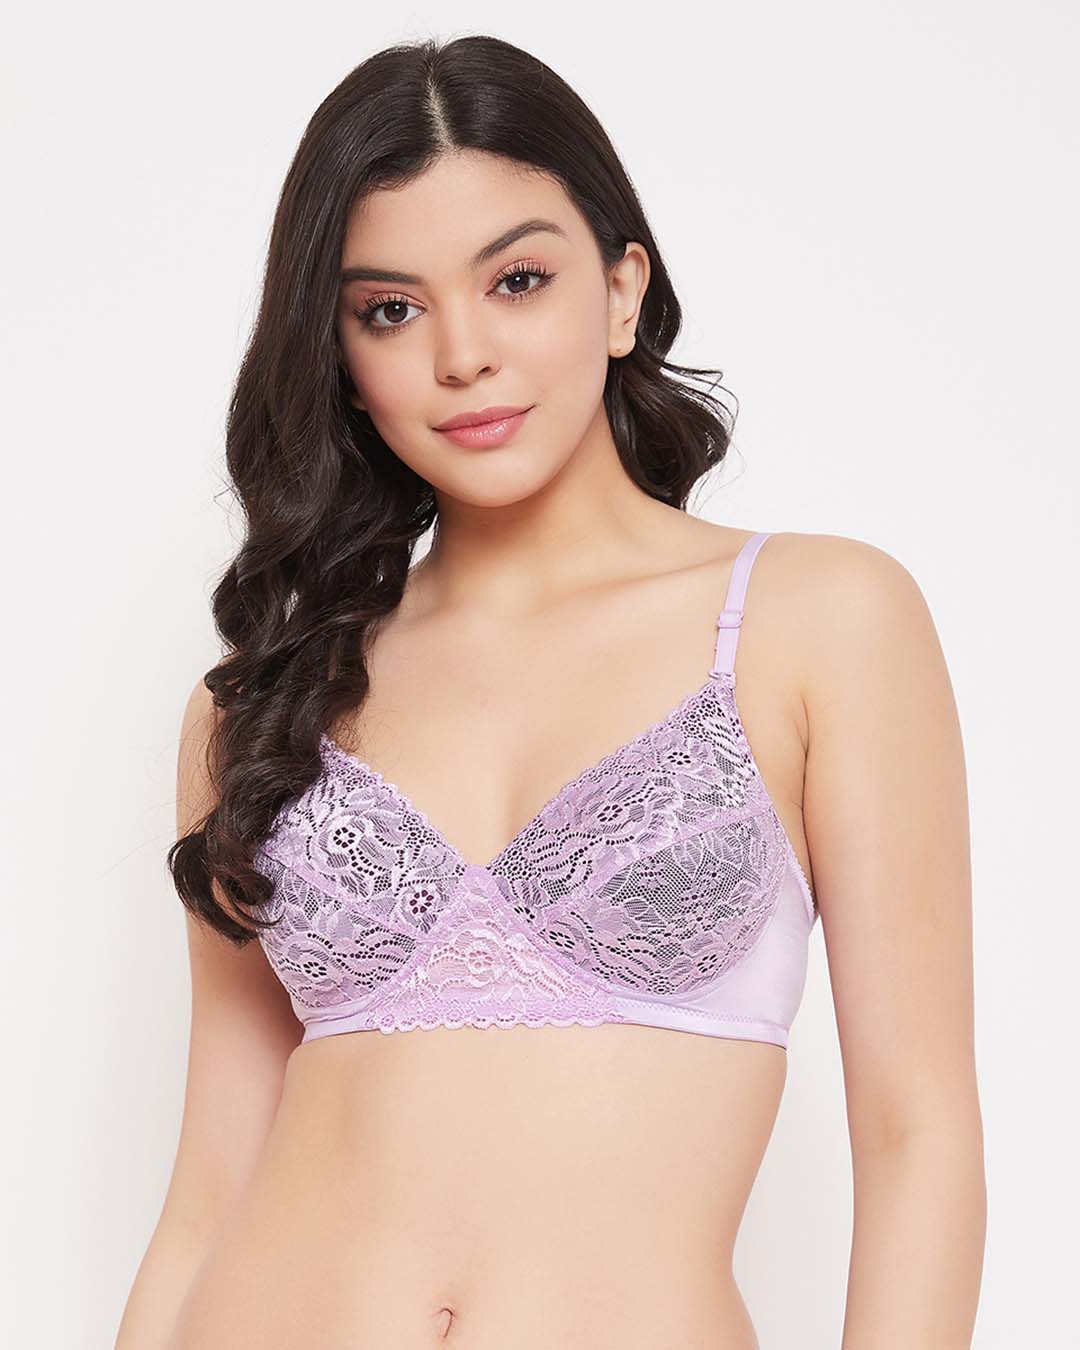 https://images.bewakoof.com/original/clovia-padded-non-wired-full-cup-multiway-bra-in-lilac--lace-clovia-women-s-bra-with-exquisite-lace-powernet-fabric01-356045-1620649366.jpg